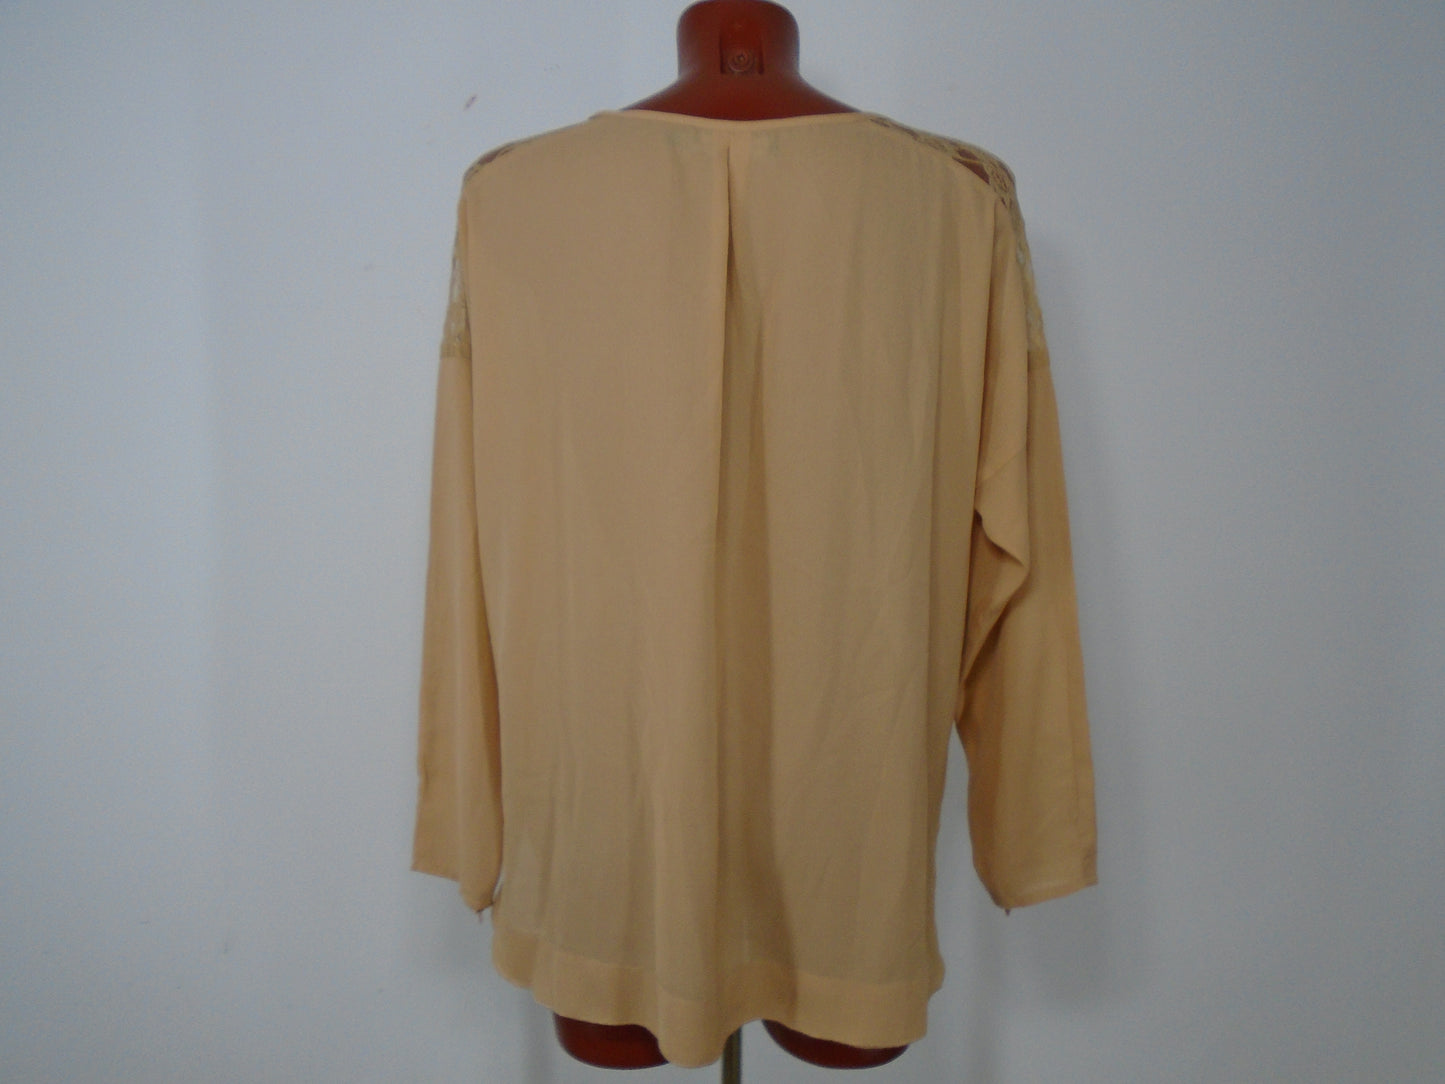 Blusa Mujer Urban Outfitters. Beige. SG. Usó. Muy buena condicion